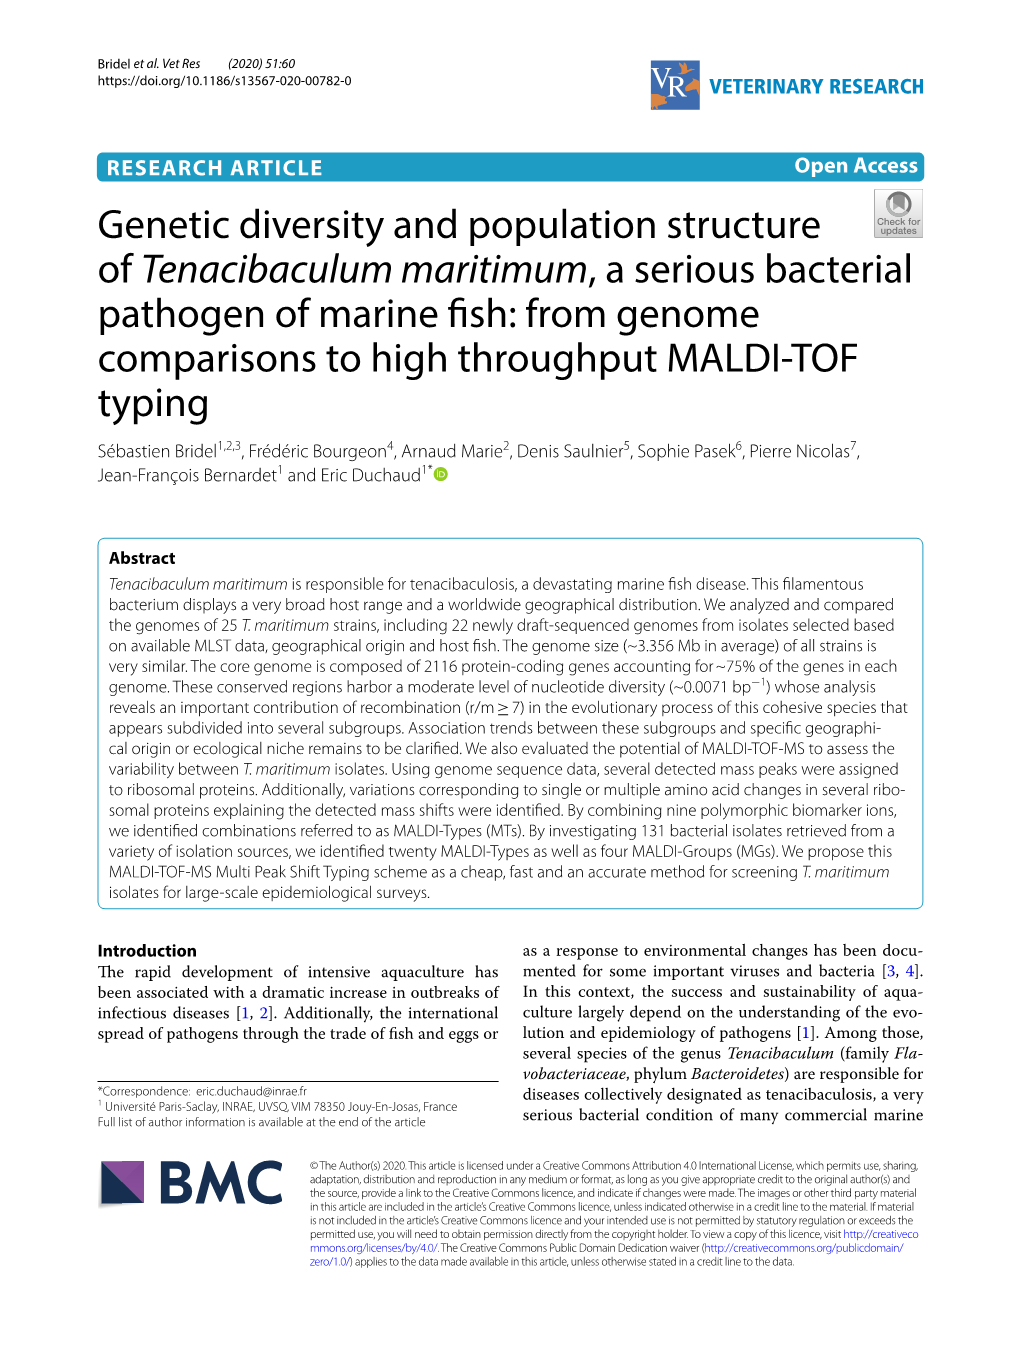 Genetic Diversity and Population Structure of Tenacibaculum Maritimum, a Serious Bacterial Pathogen of Marine Fish: from Genome